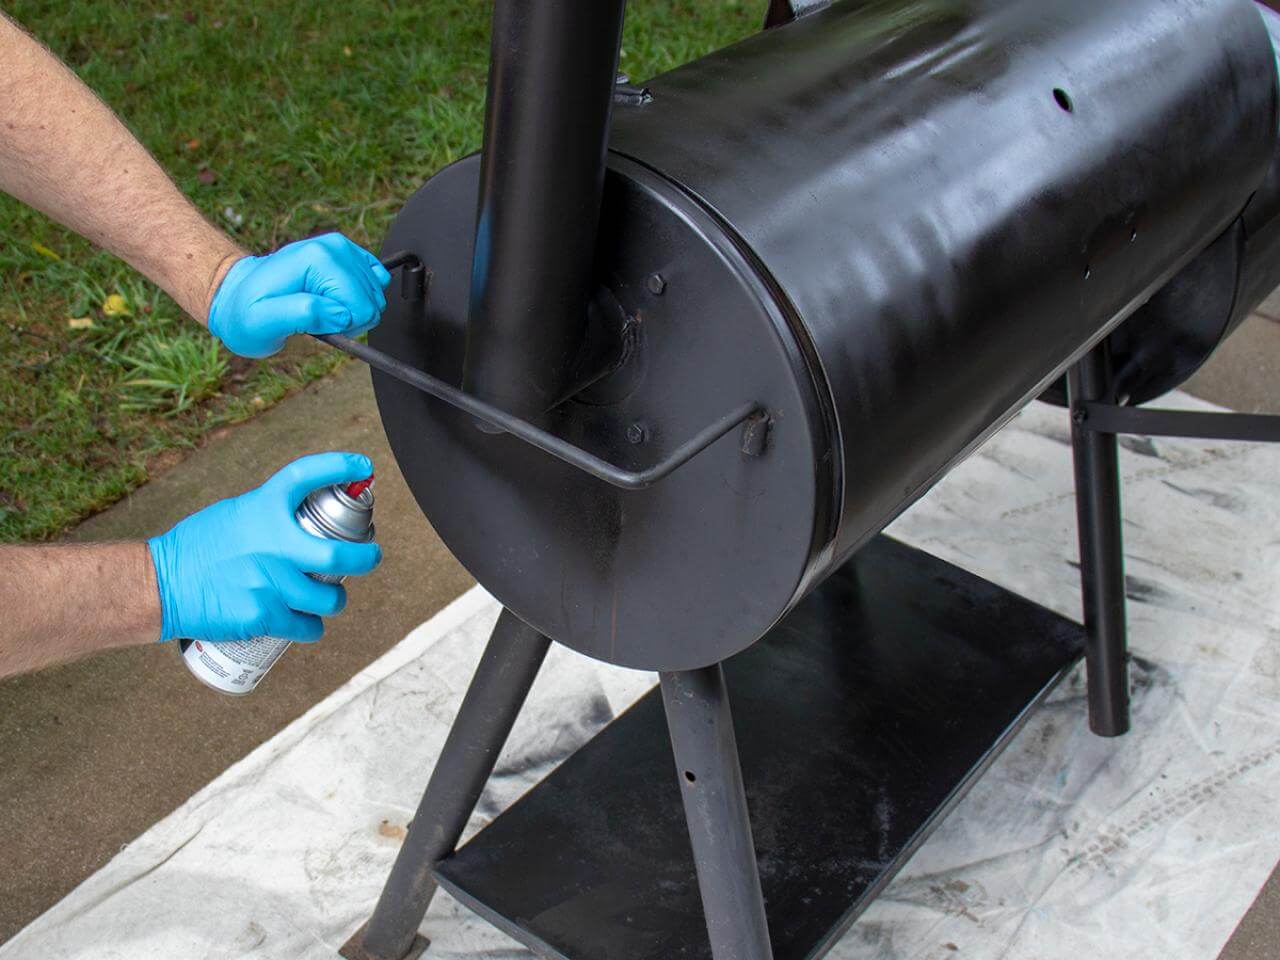 You can repaint your grill if the surface looks worn.